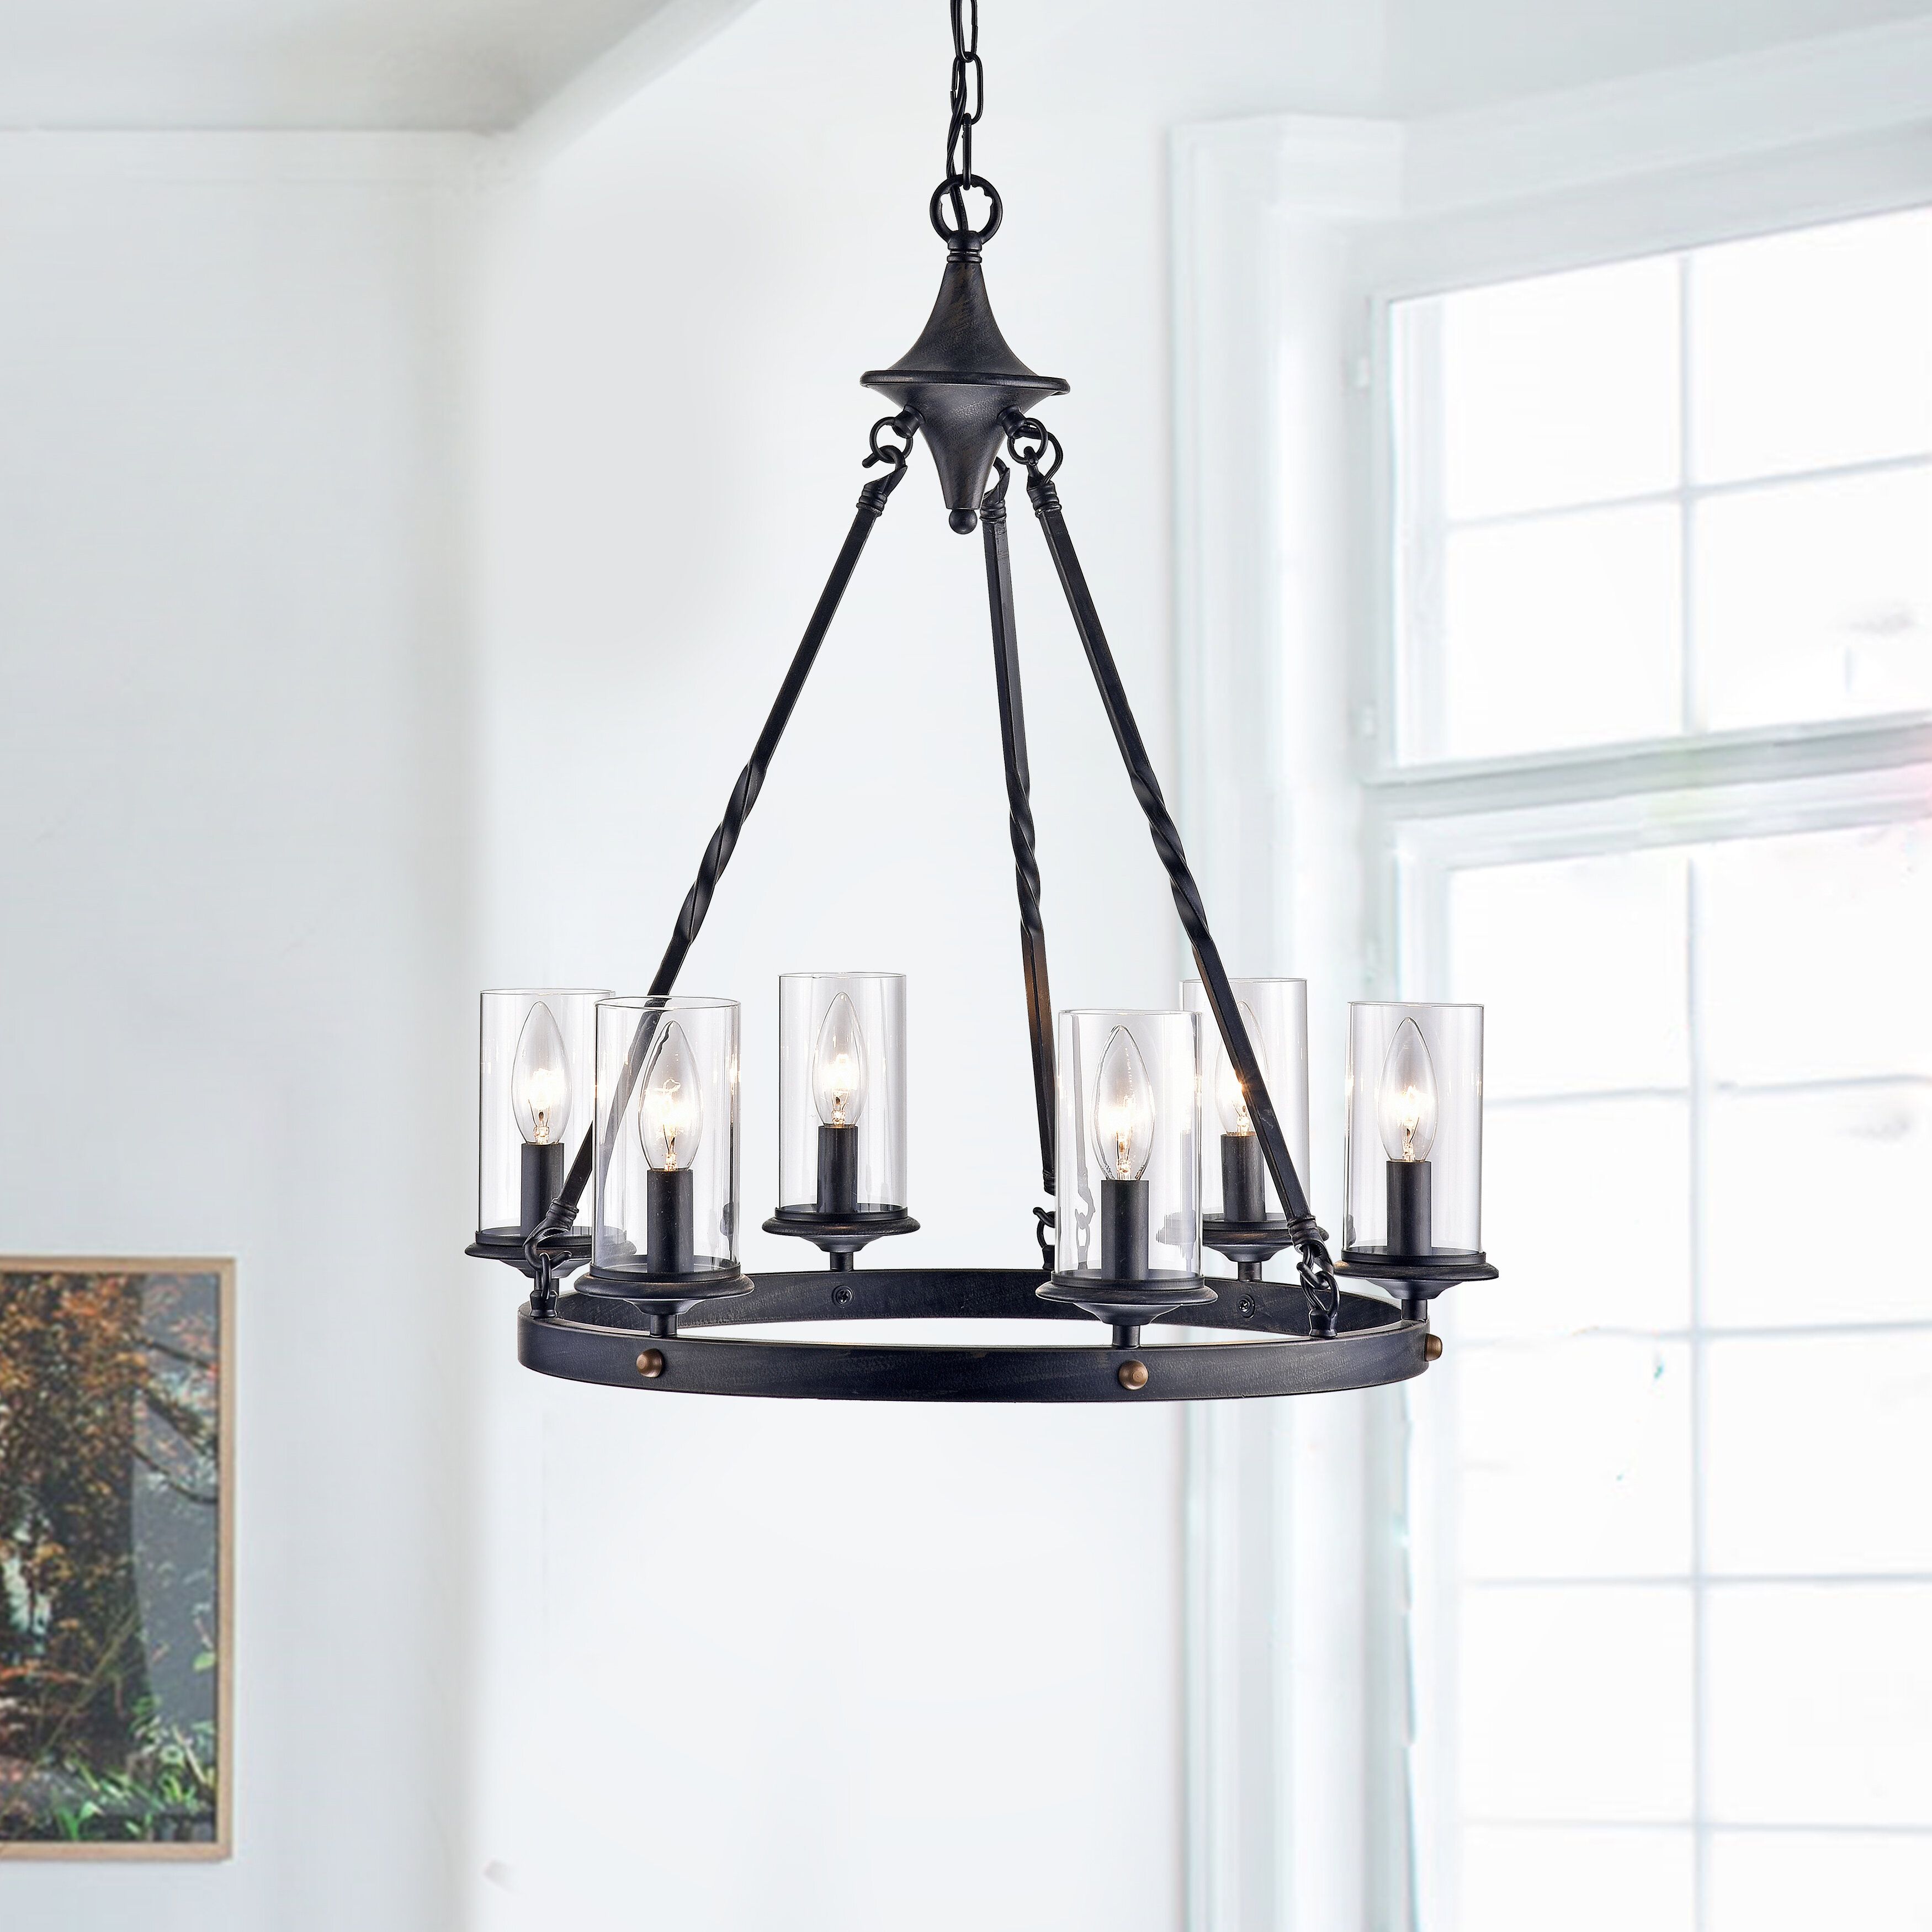 Farmhouse & Rustic Black Chandeliers | Birch Lane Within Hamza 6 Light Candle Style Chandeliers (View 24 of 30)